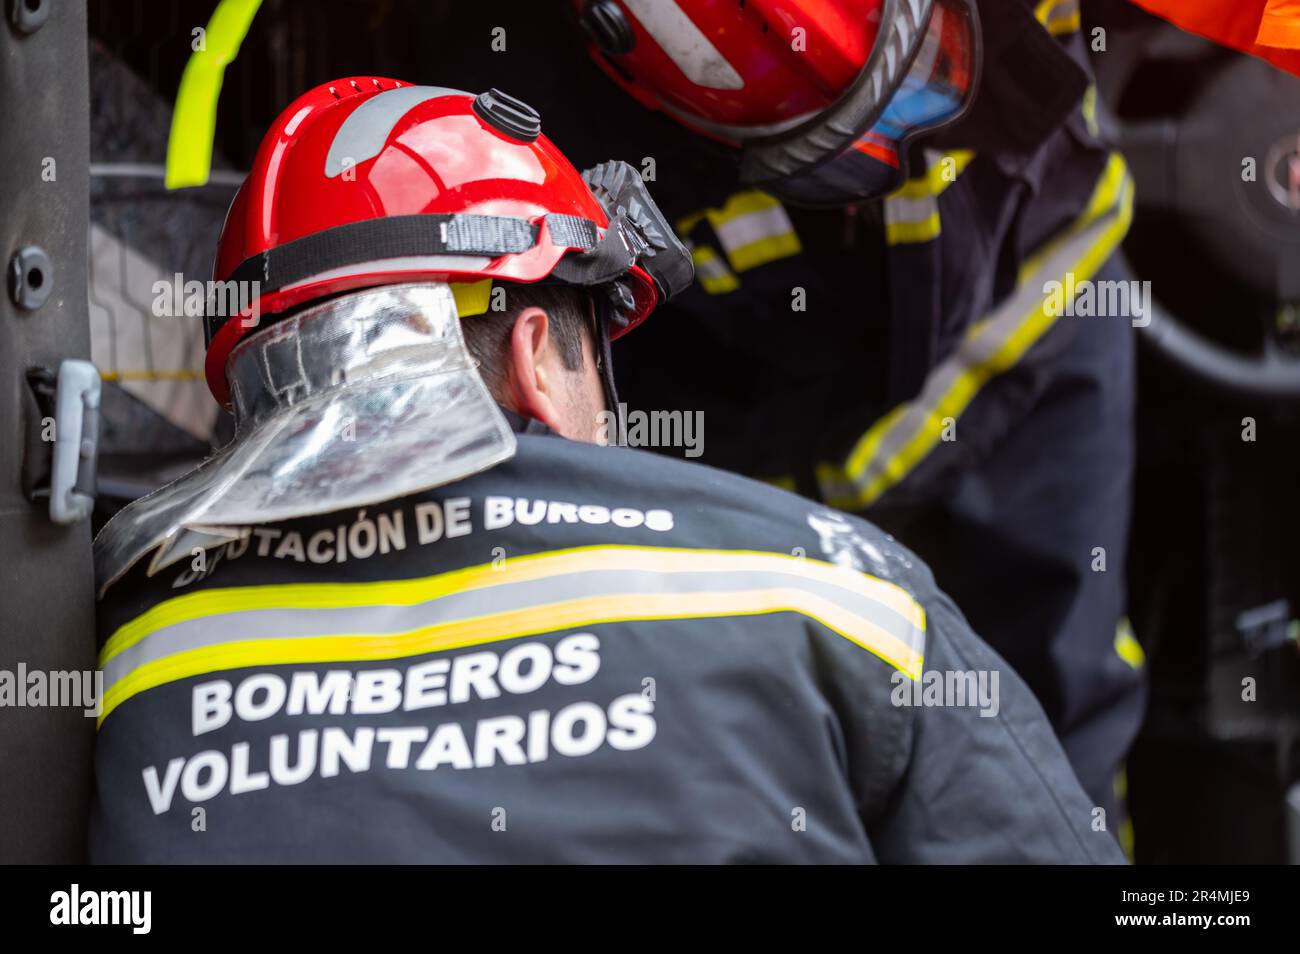 Car Crash Traffic Accident. Firefighters Rescue Injured Trapped Victims. Firemen give First Aid to passengers. High quality photography. Stock Photo